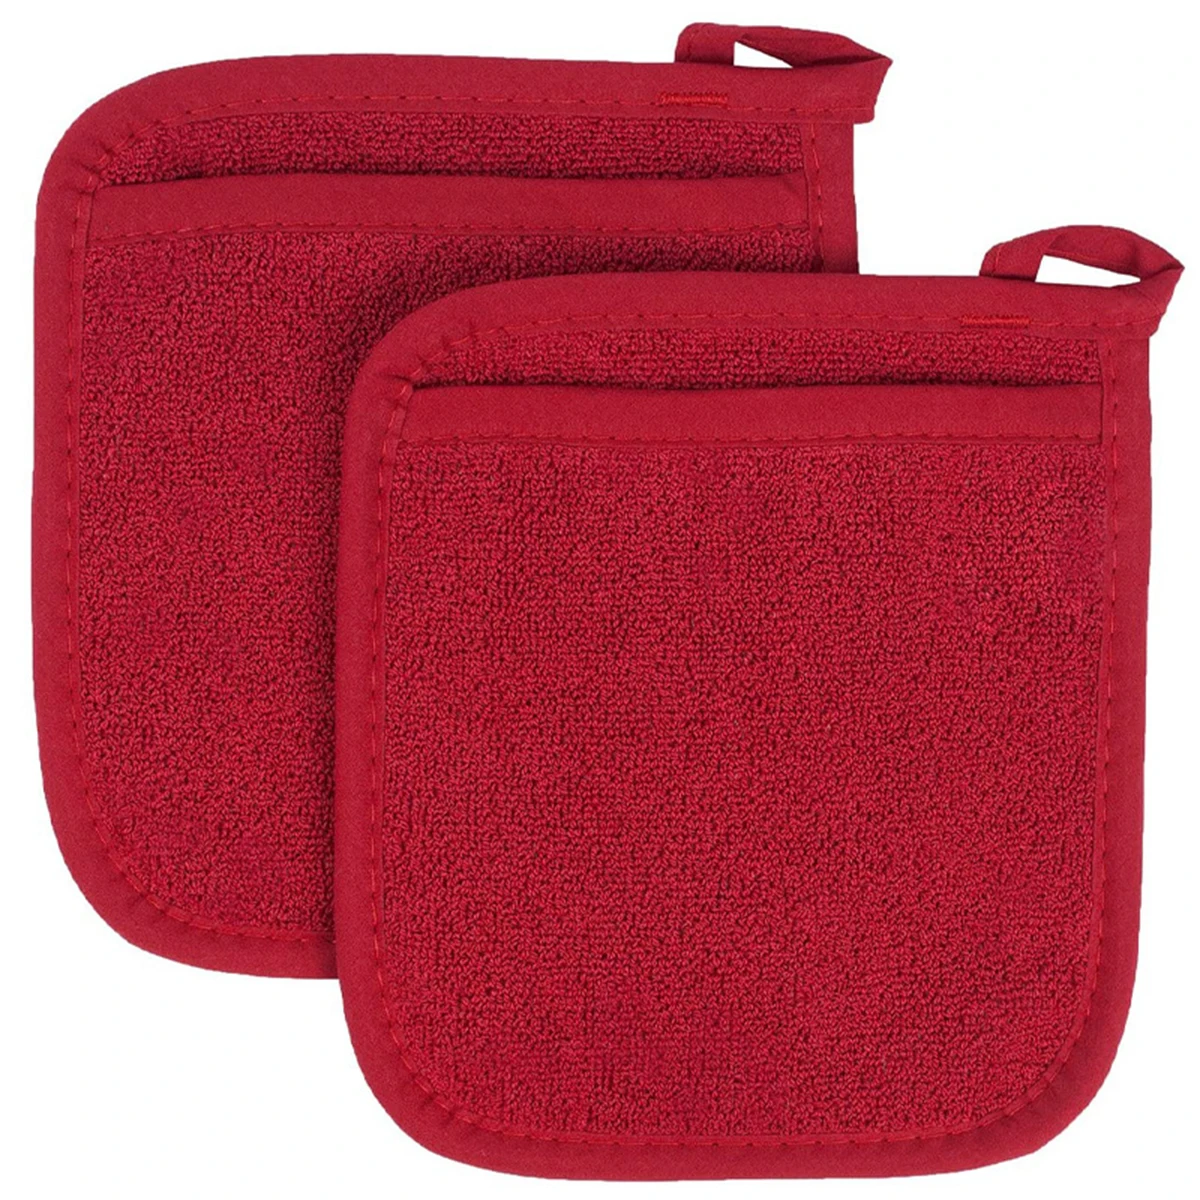 2Pcs Pot Holders Soft Polyester Kitchen Hot Pads with 2 Pocket Portable US